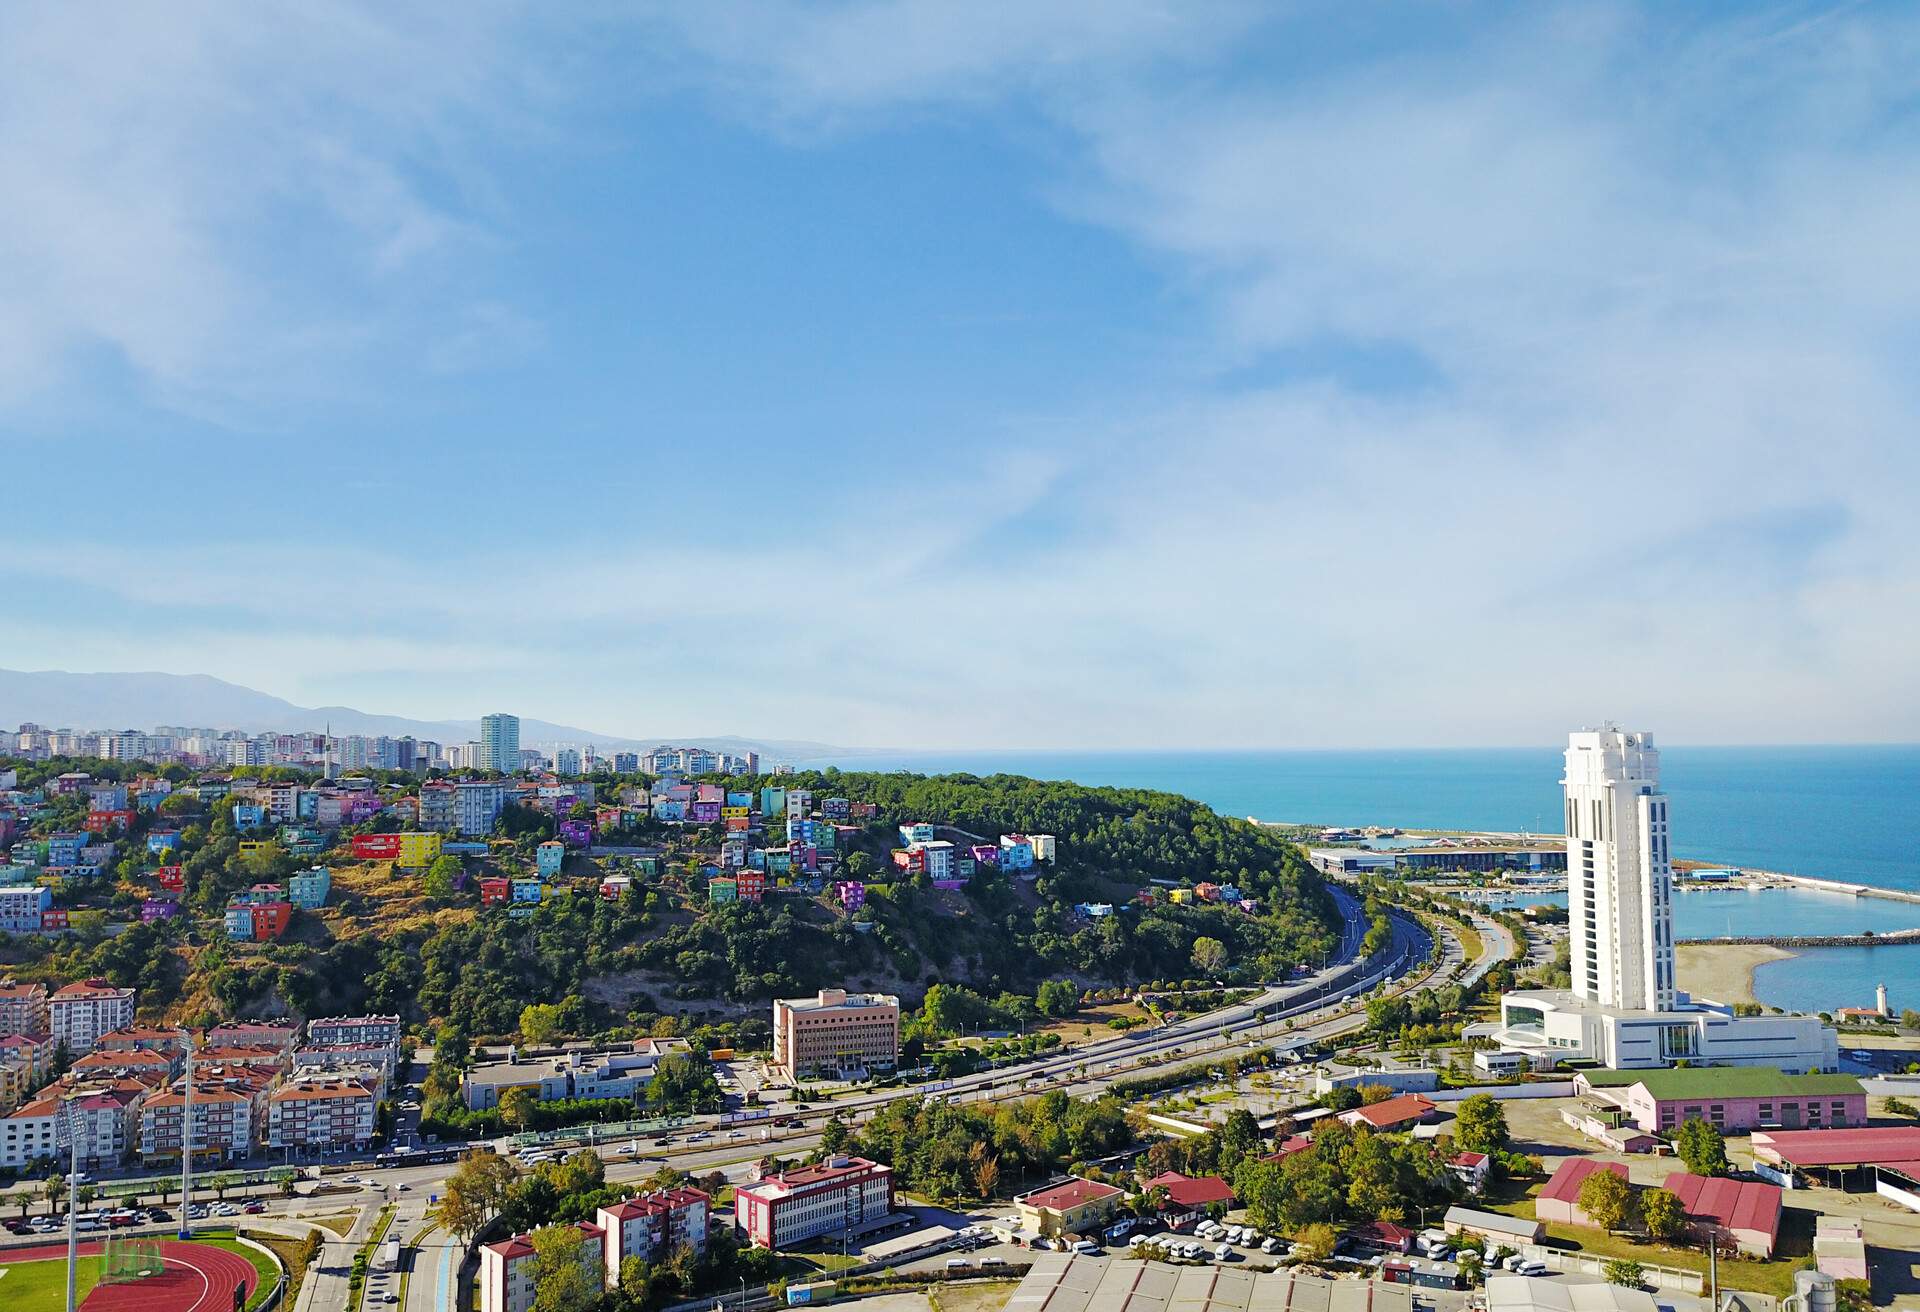 Aerial View of Famous City at the coastline of the turkish Black Sea. Samsun